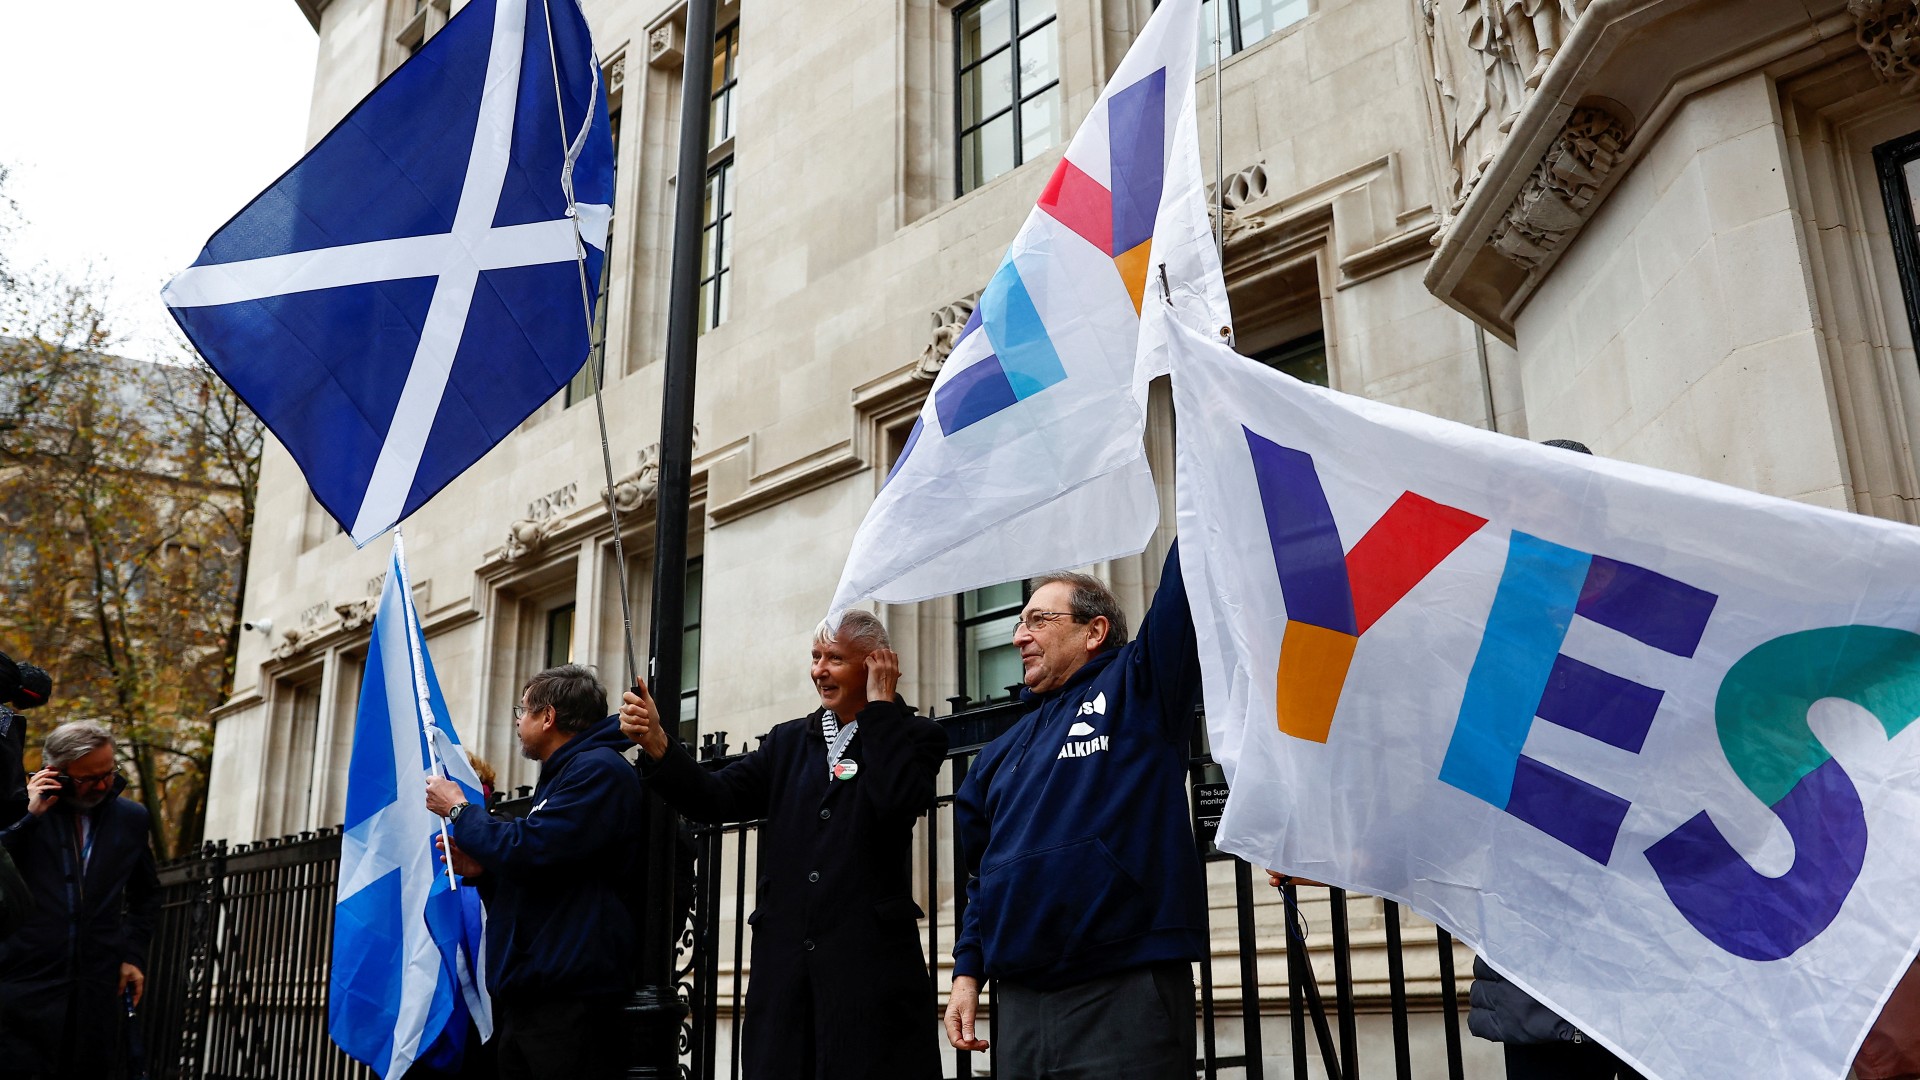 Pro-Scottish independence campaigners ahead of Wednesday's court ruling./Peter Nicholls/Reuters